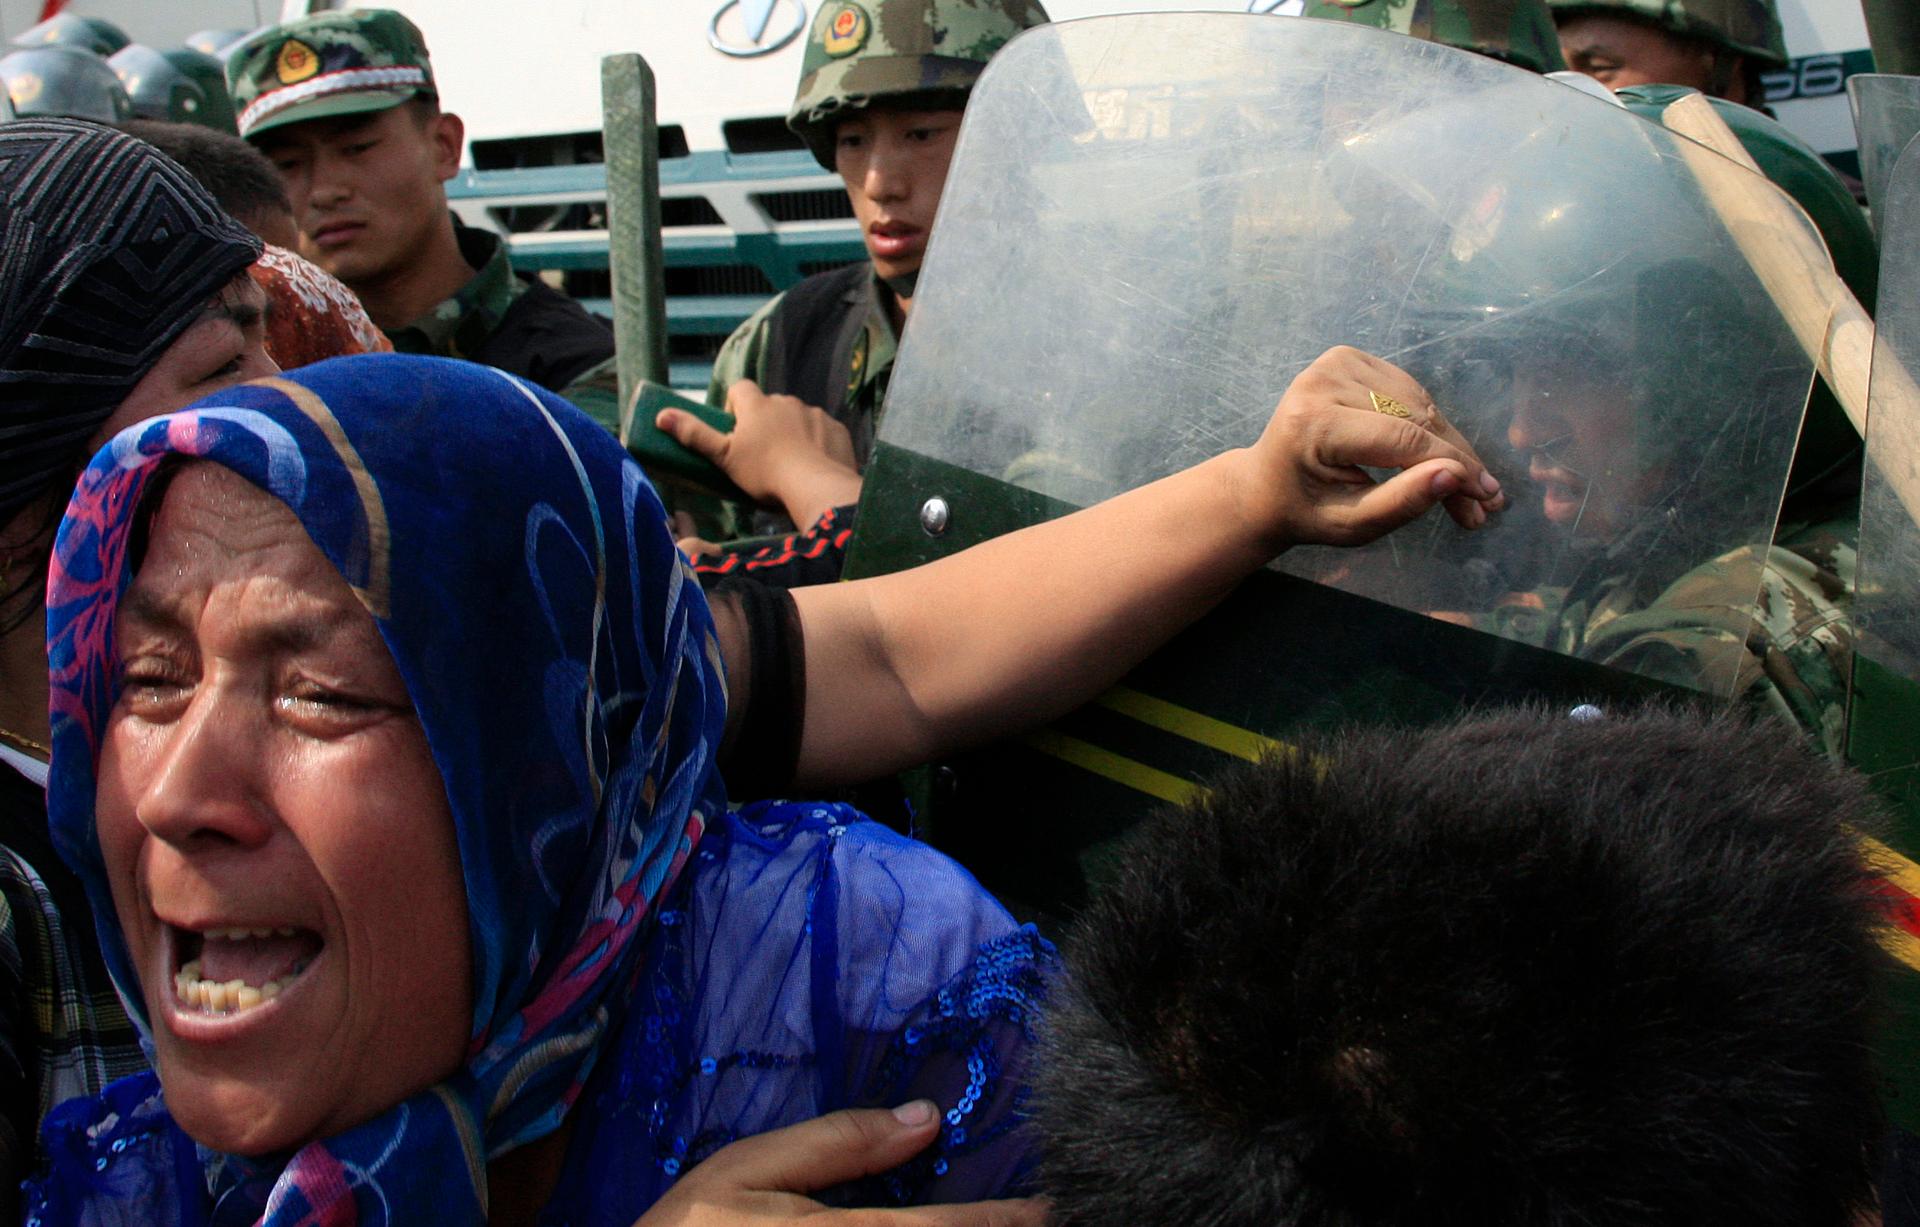 A woman pushes at Chinese paramilitary police wearing riot gear as a crowd of angry locals confront security forces on a street in the city of Urumqi in China's Xinjiang Autonomous Region on July 7, 2009.